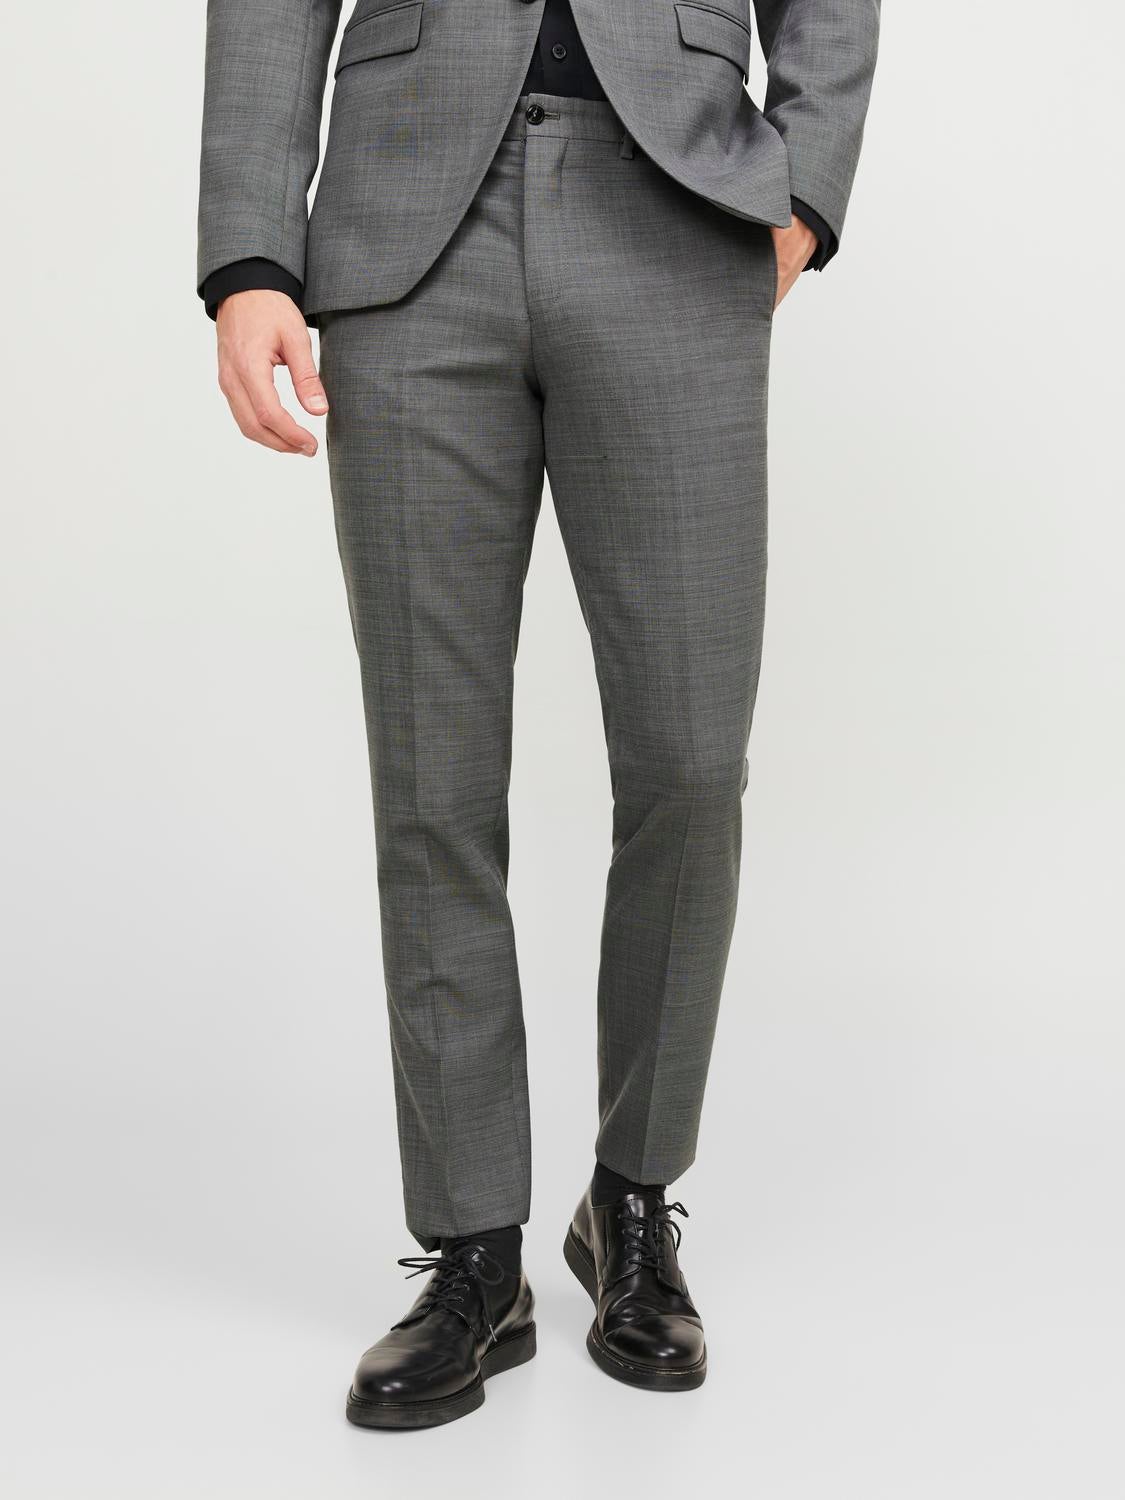 Men's Suit Trousers - Mix & Match your size in various colors and fabrics |  SUITSUPPLY Japan